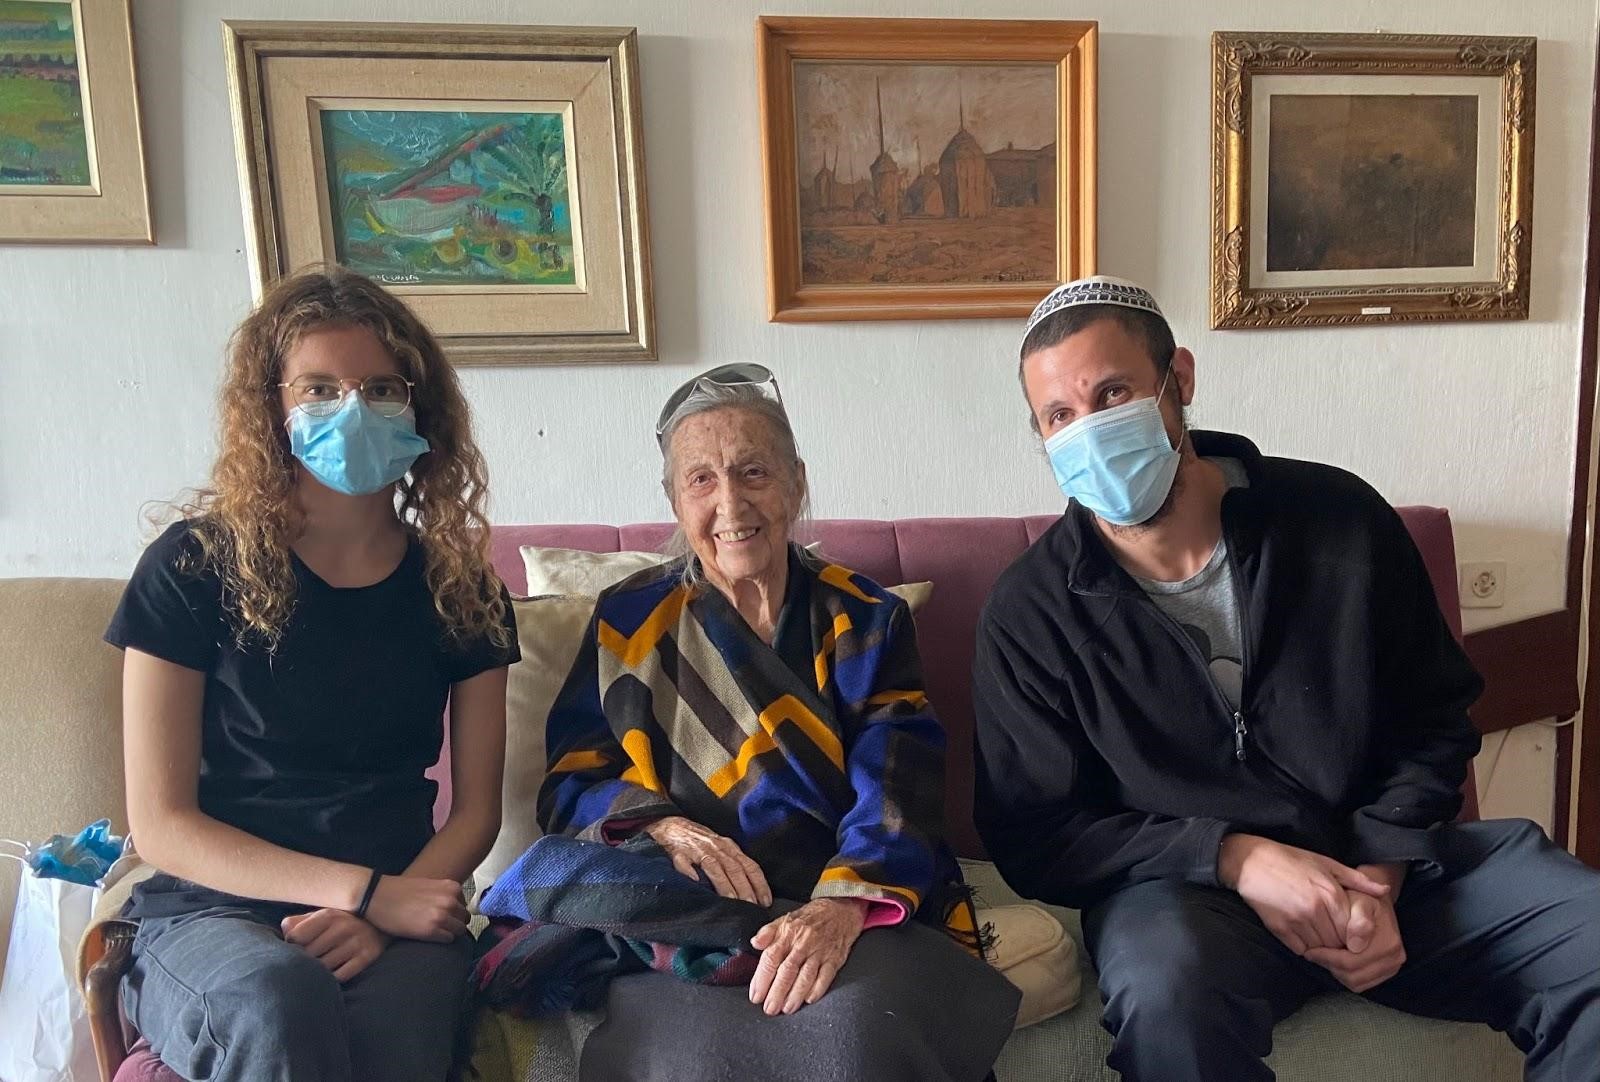 Alda at her home in Shavei Zion after the interview with volunteer Hila and research manager Ariel.